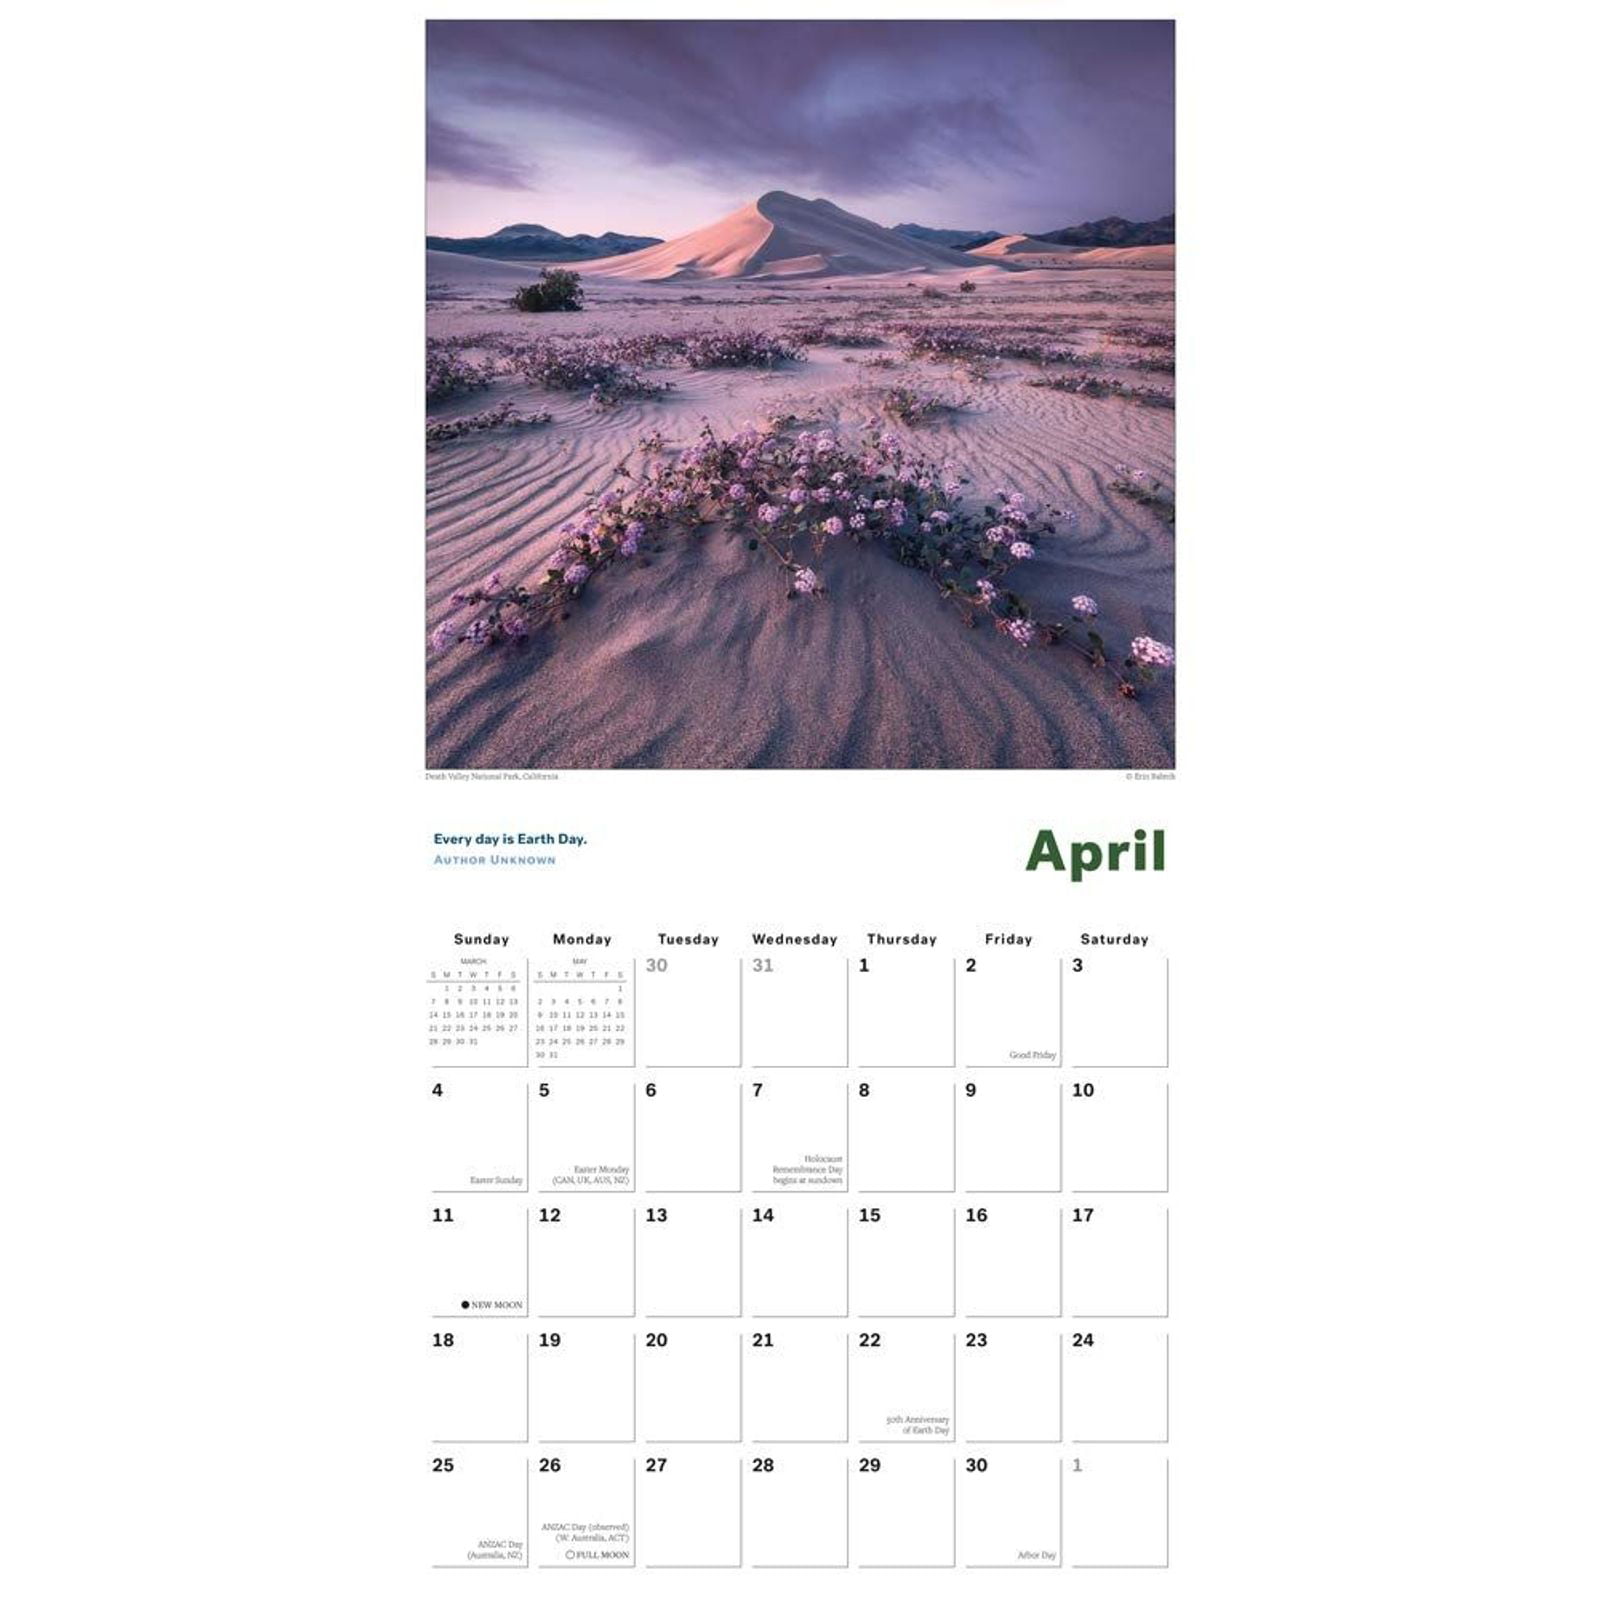 Quick Free USPS Shipping!! 2020 16 Month Wilderness Society Wall Calendar 